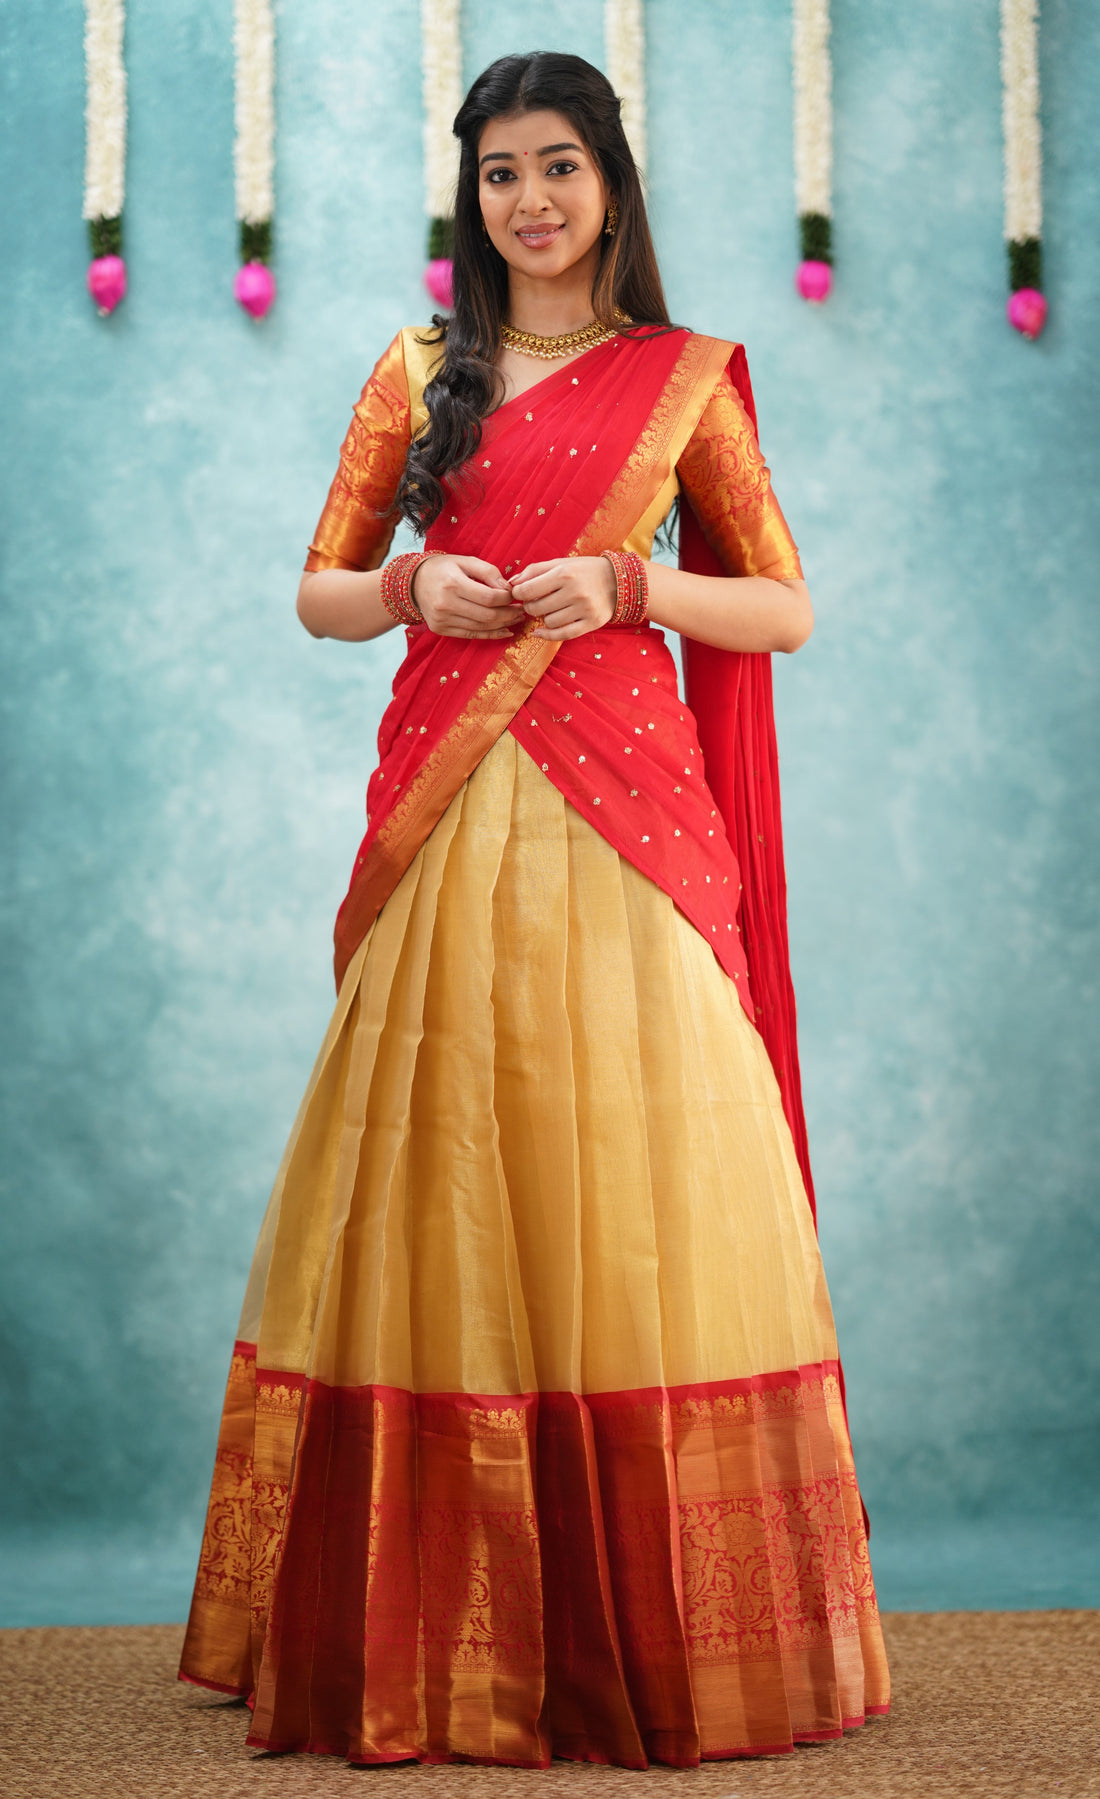 Izhaiyini Shade of Red and Gold tone Organza Halfsaree (Express Delivery)